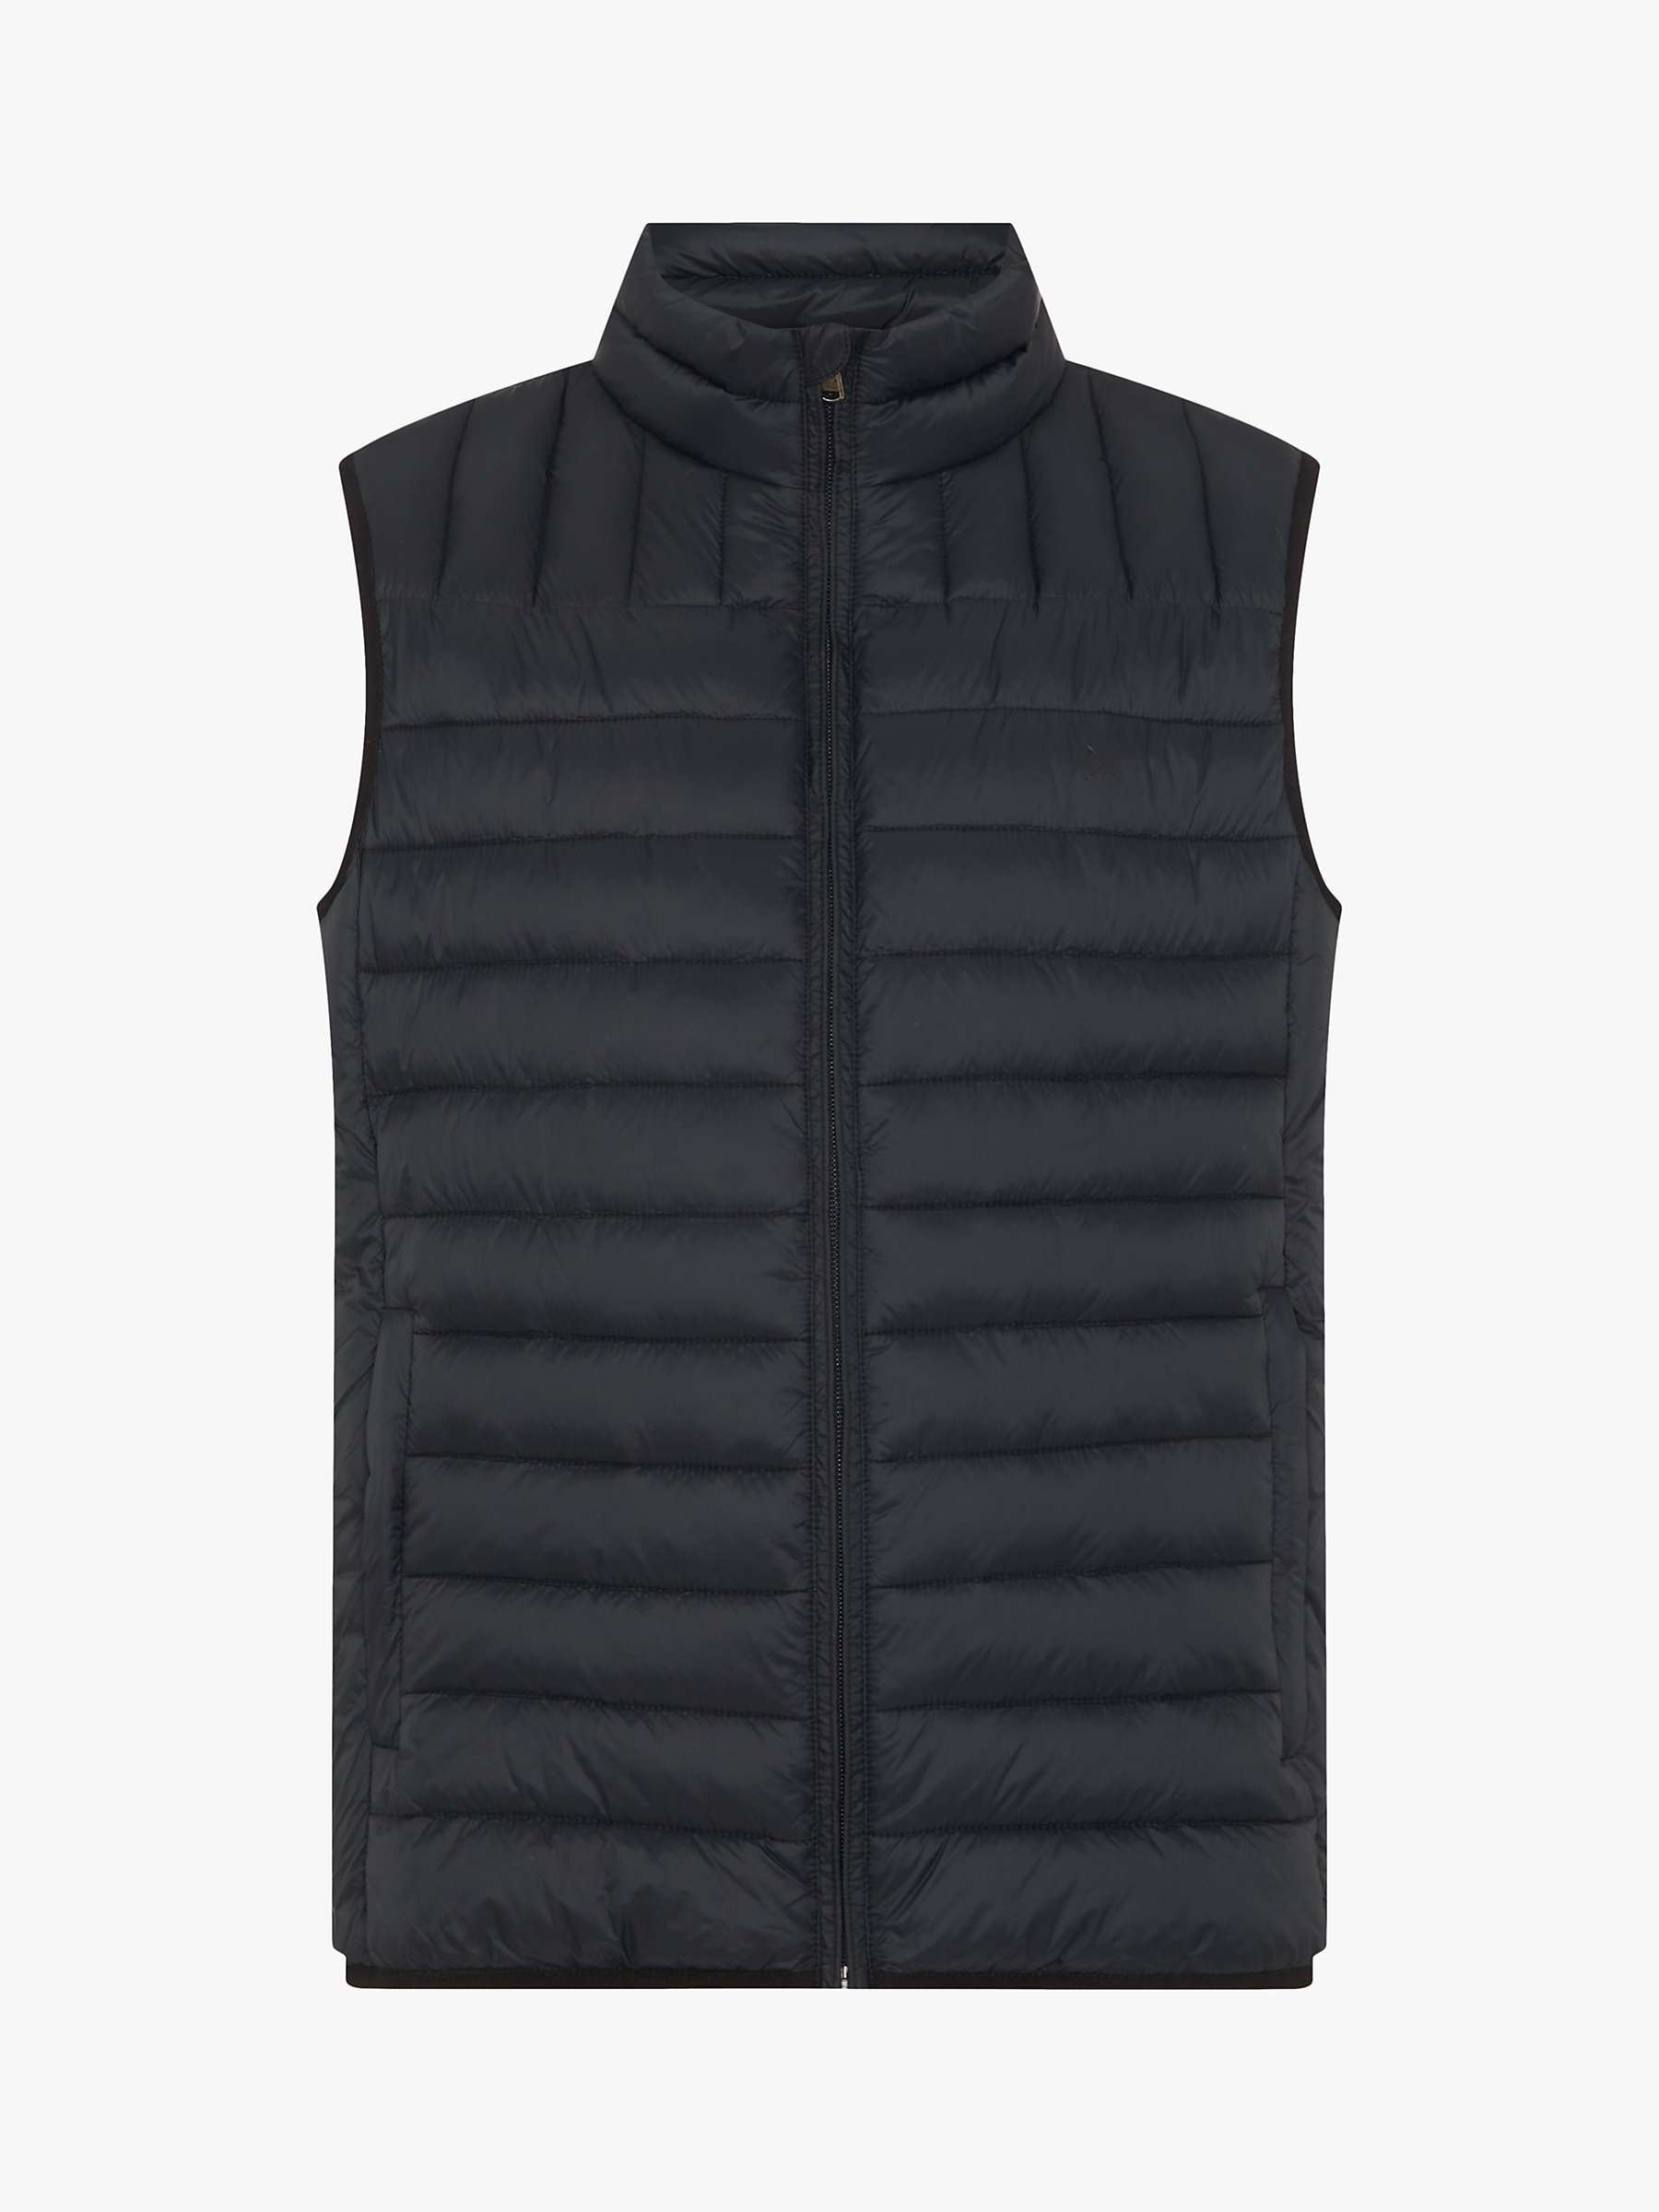 Crew Clothing Lightweight Lowther Gilet, Black at John Lewis & Partners